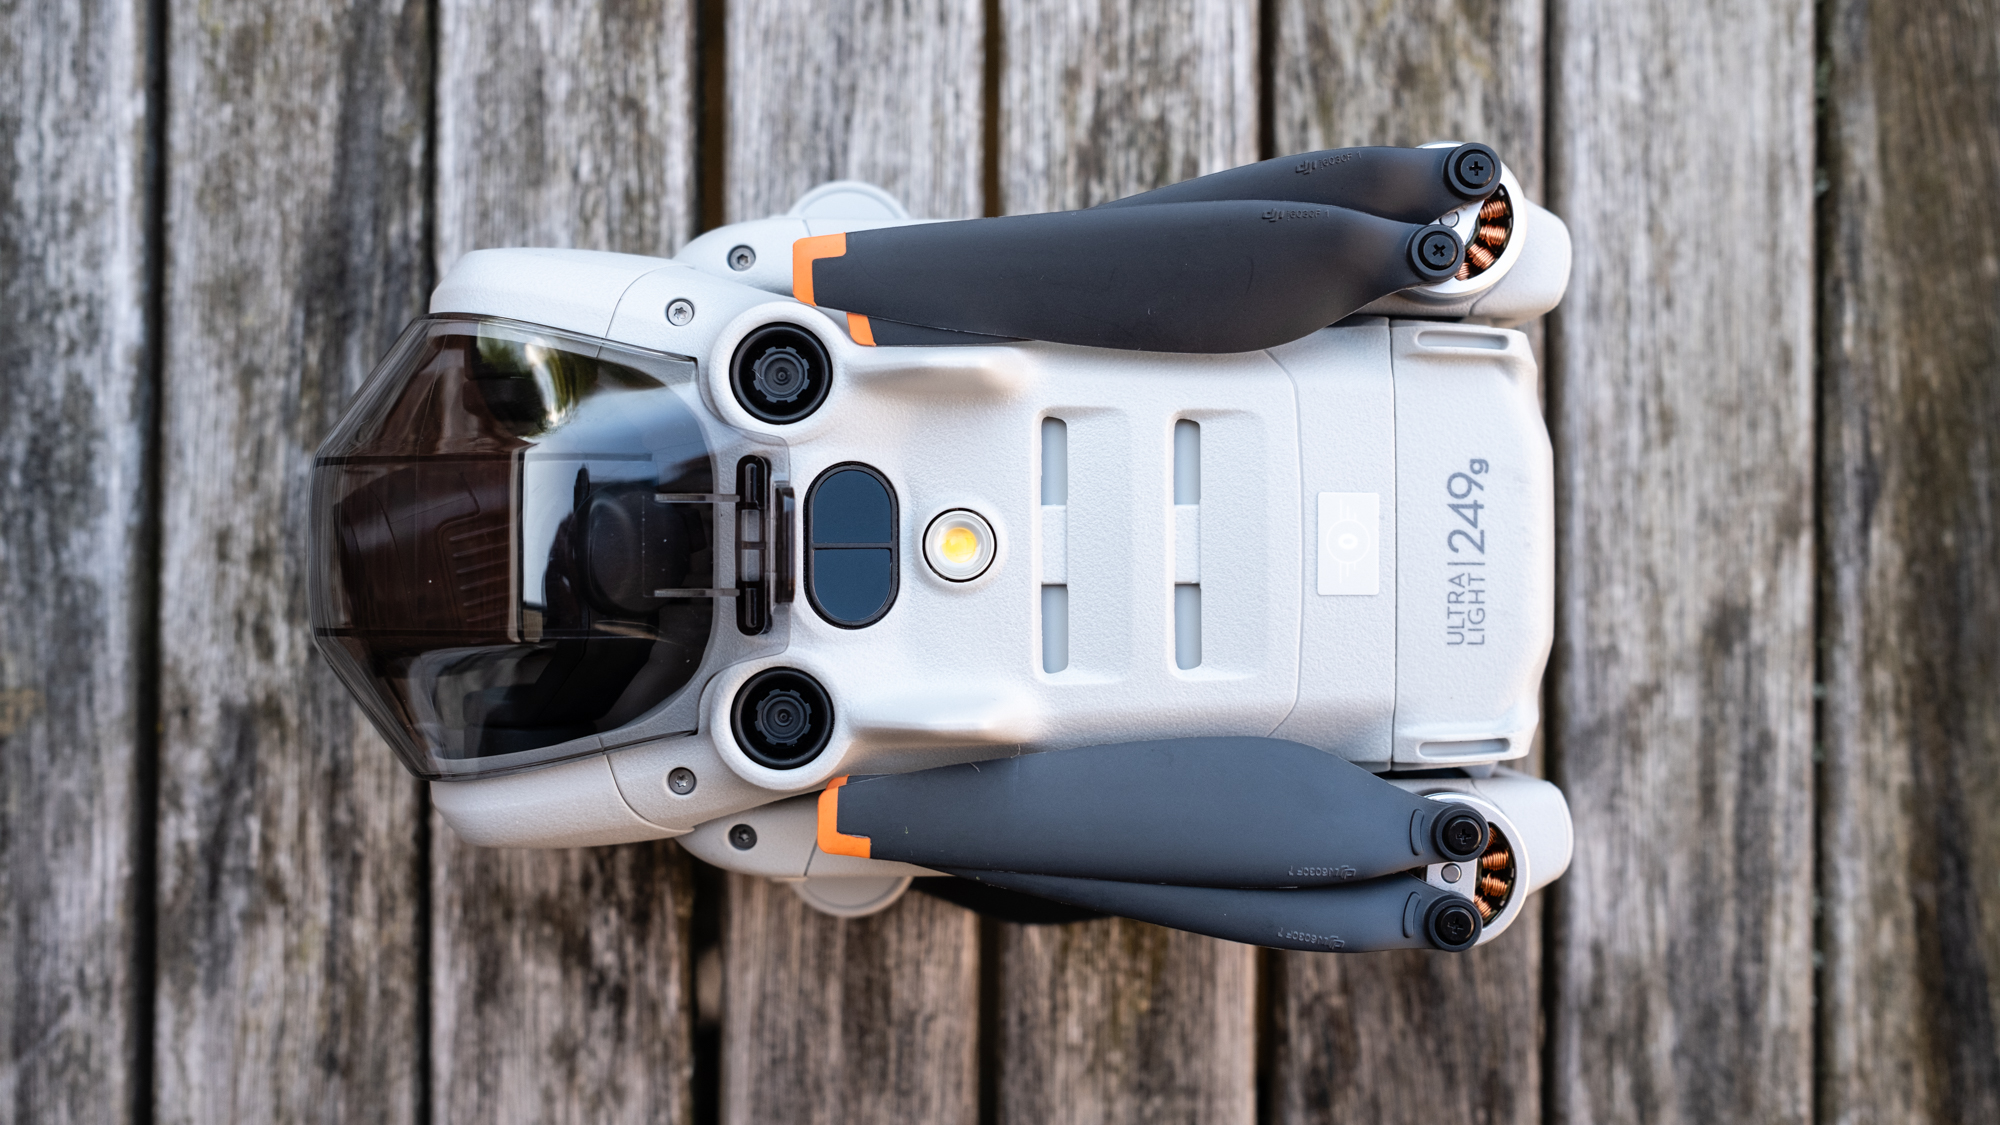 The underside of the folded Mini 4 Pro drone showing transparent tinted plastic covering the drone's camera.